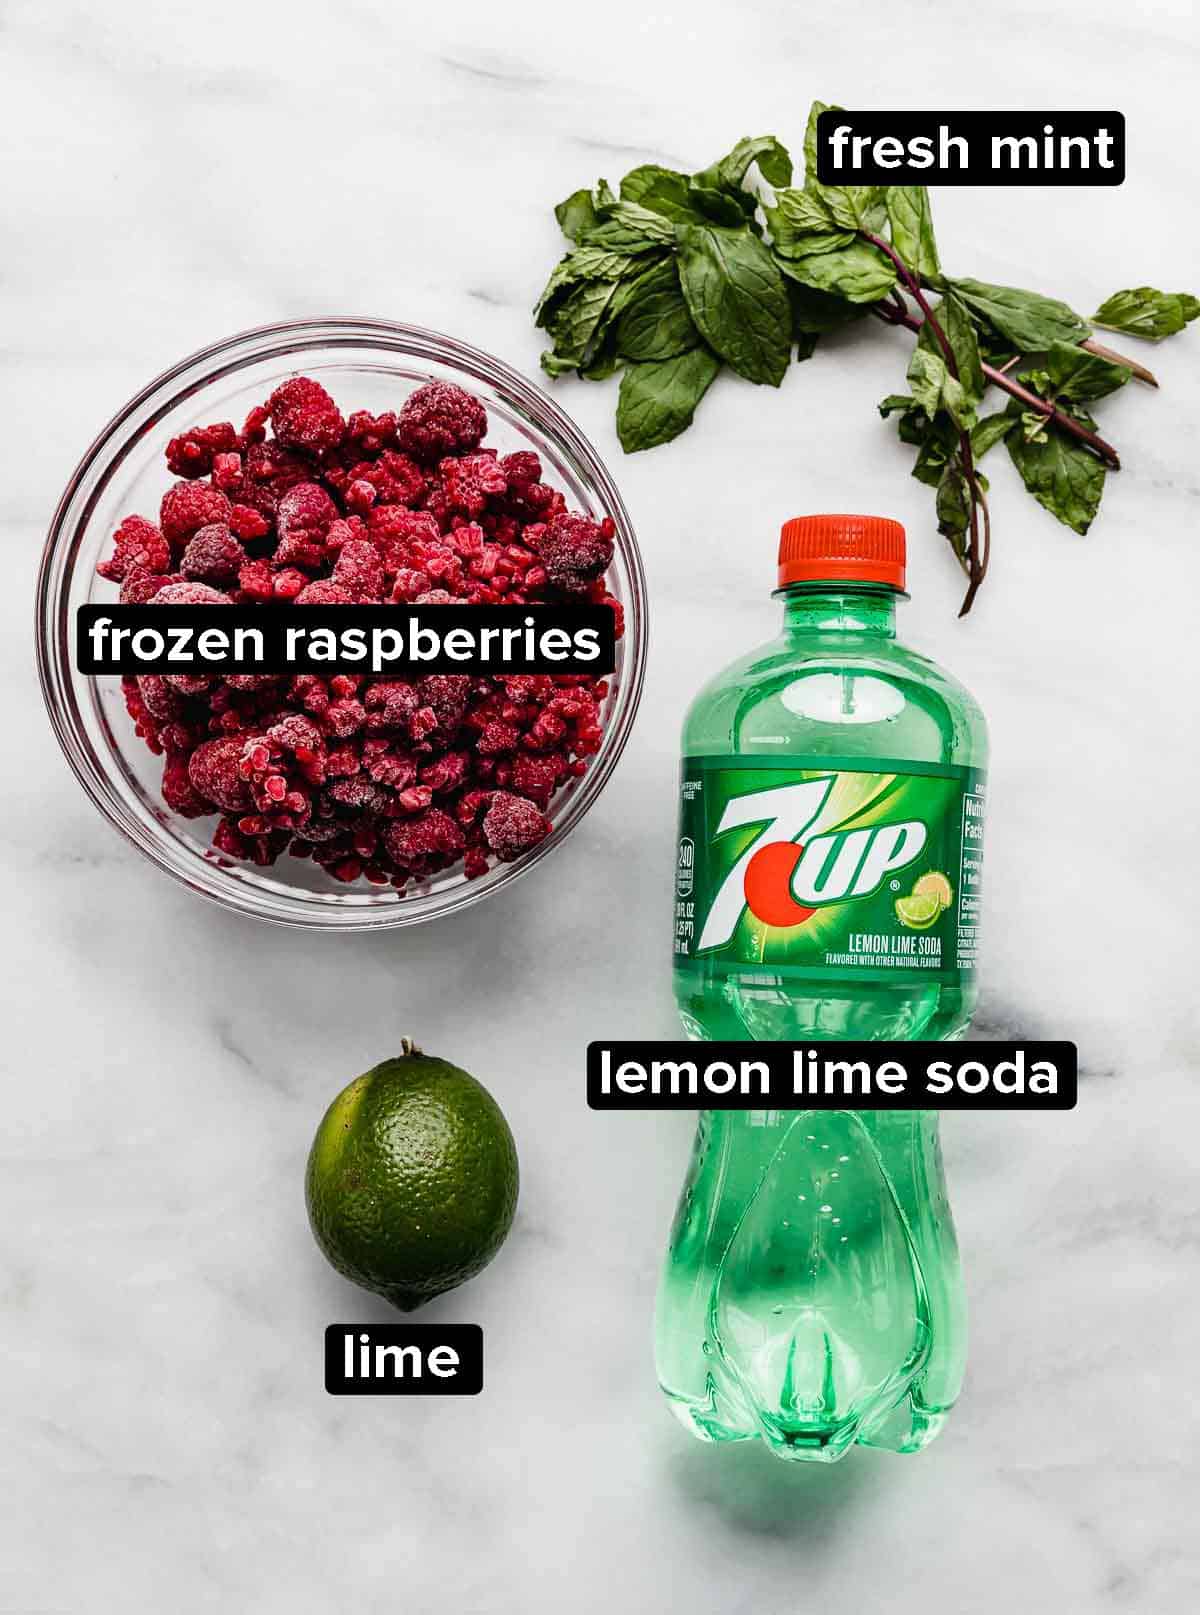 Raspberry Mojito Mocktail ingredients on a white background: raspberries, mint, lime, and lemon lime soda.